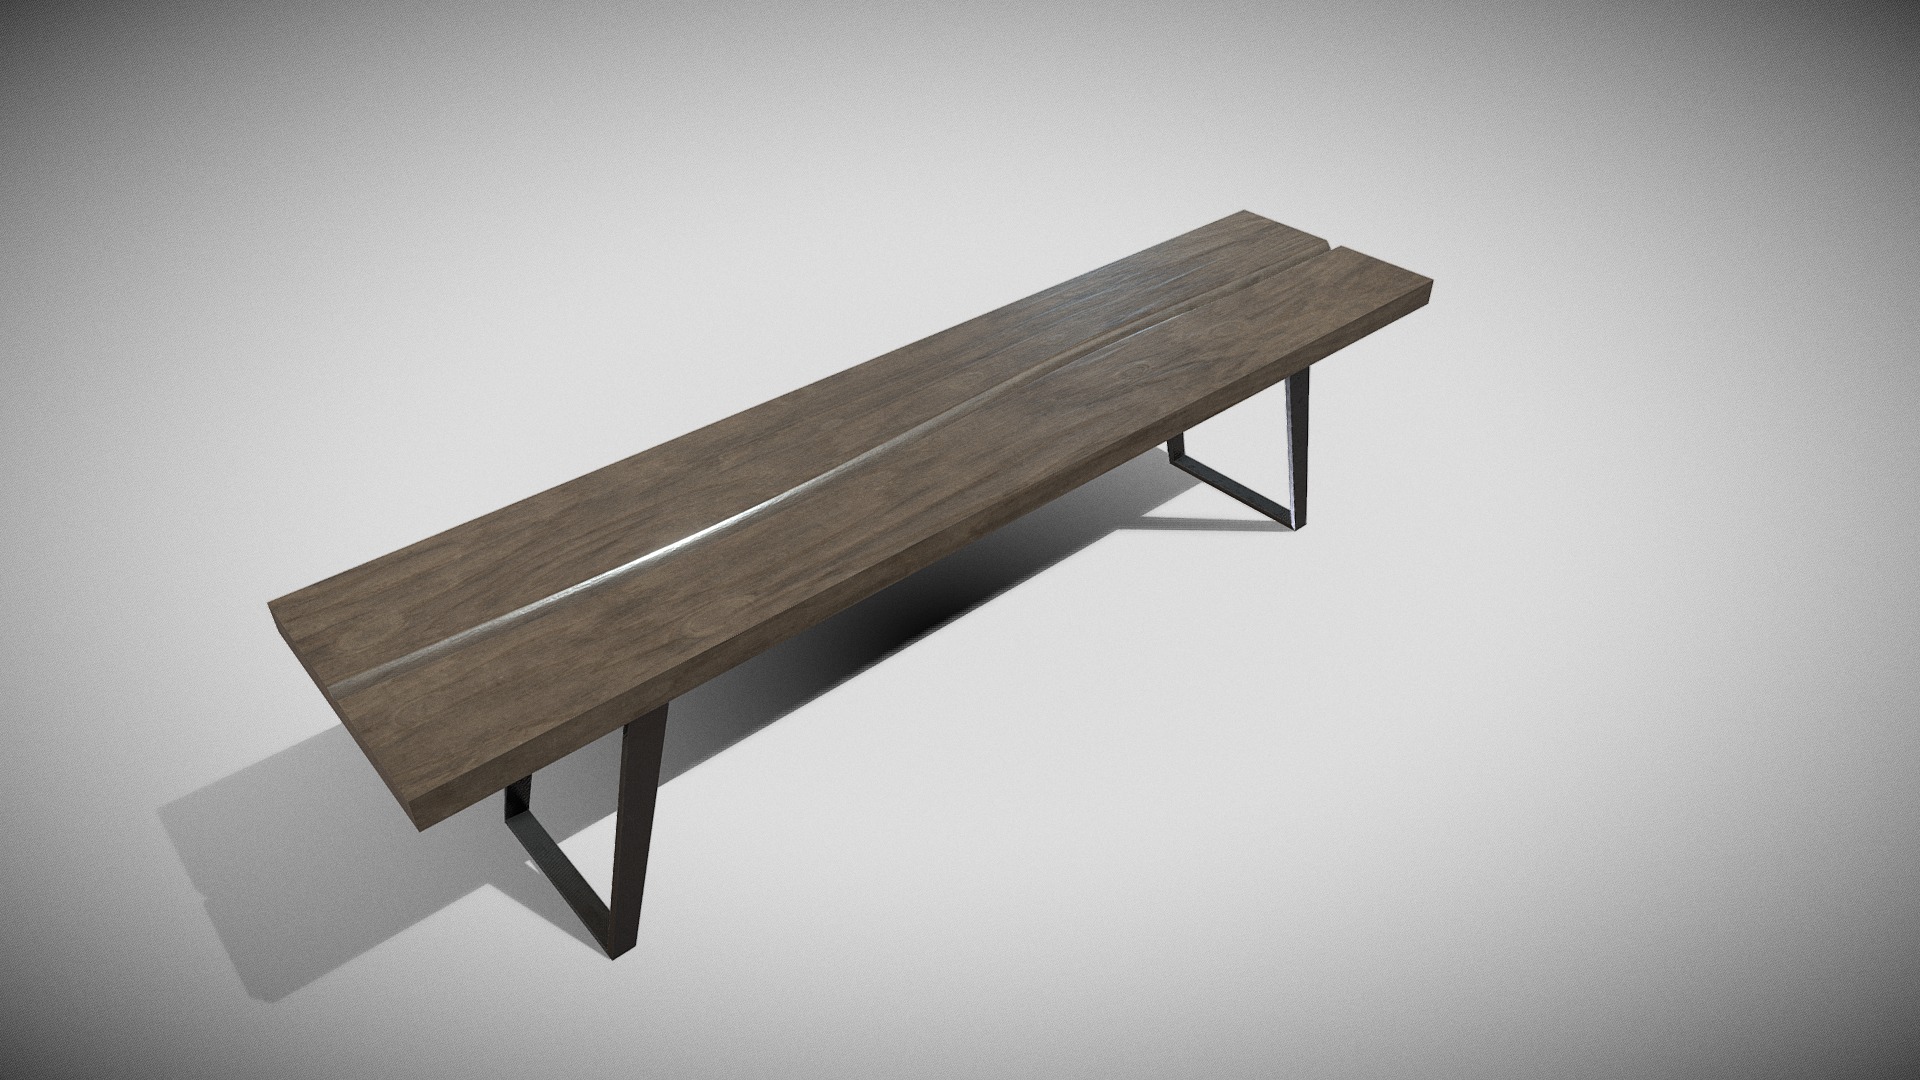 3D model Bench wooden 04 - This is a 3D model of the Bench wooden 04. The 3D model is about a wooden table on a white background.